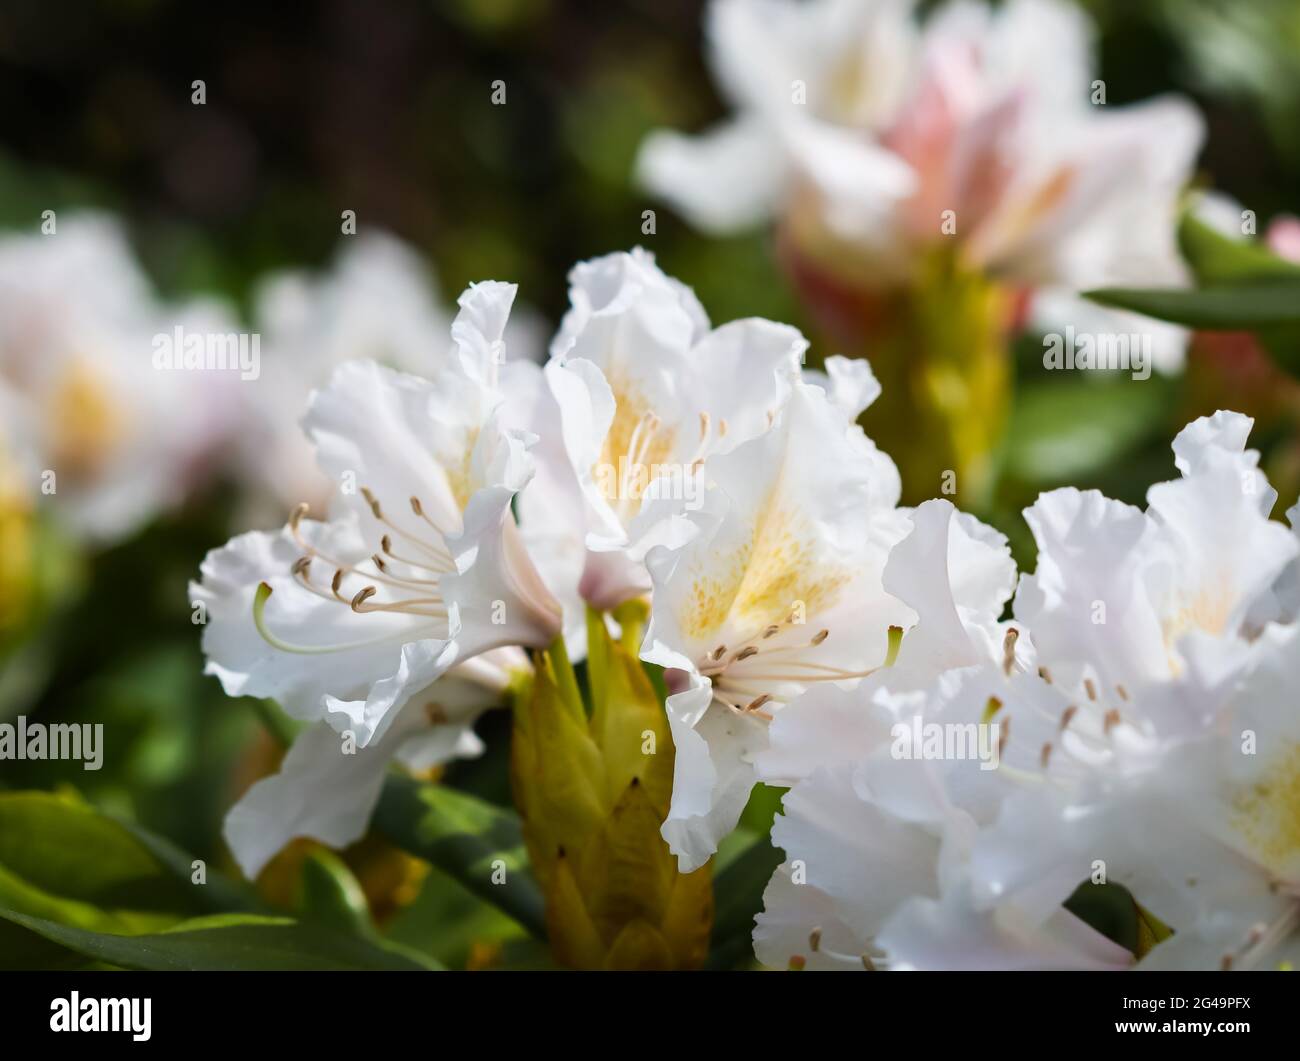 Blooming beautiful white flower of Rhododendron Cunningham's White in spring garden. Gardening concept. Floral background Stock Photo